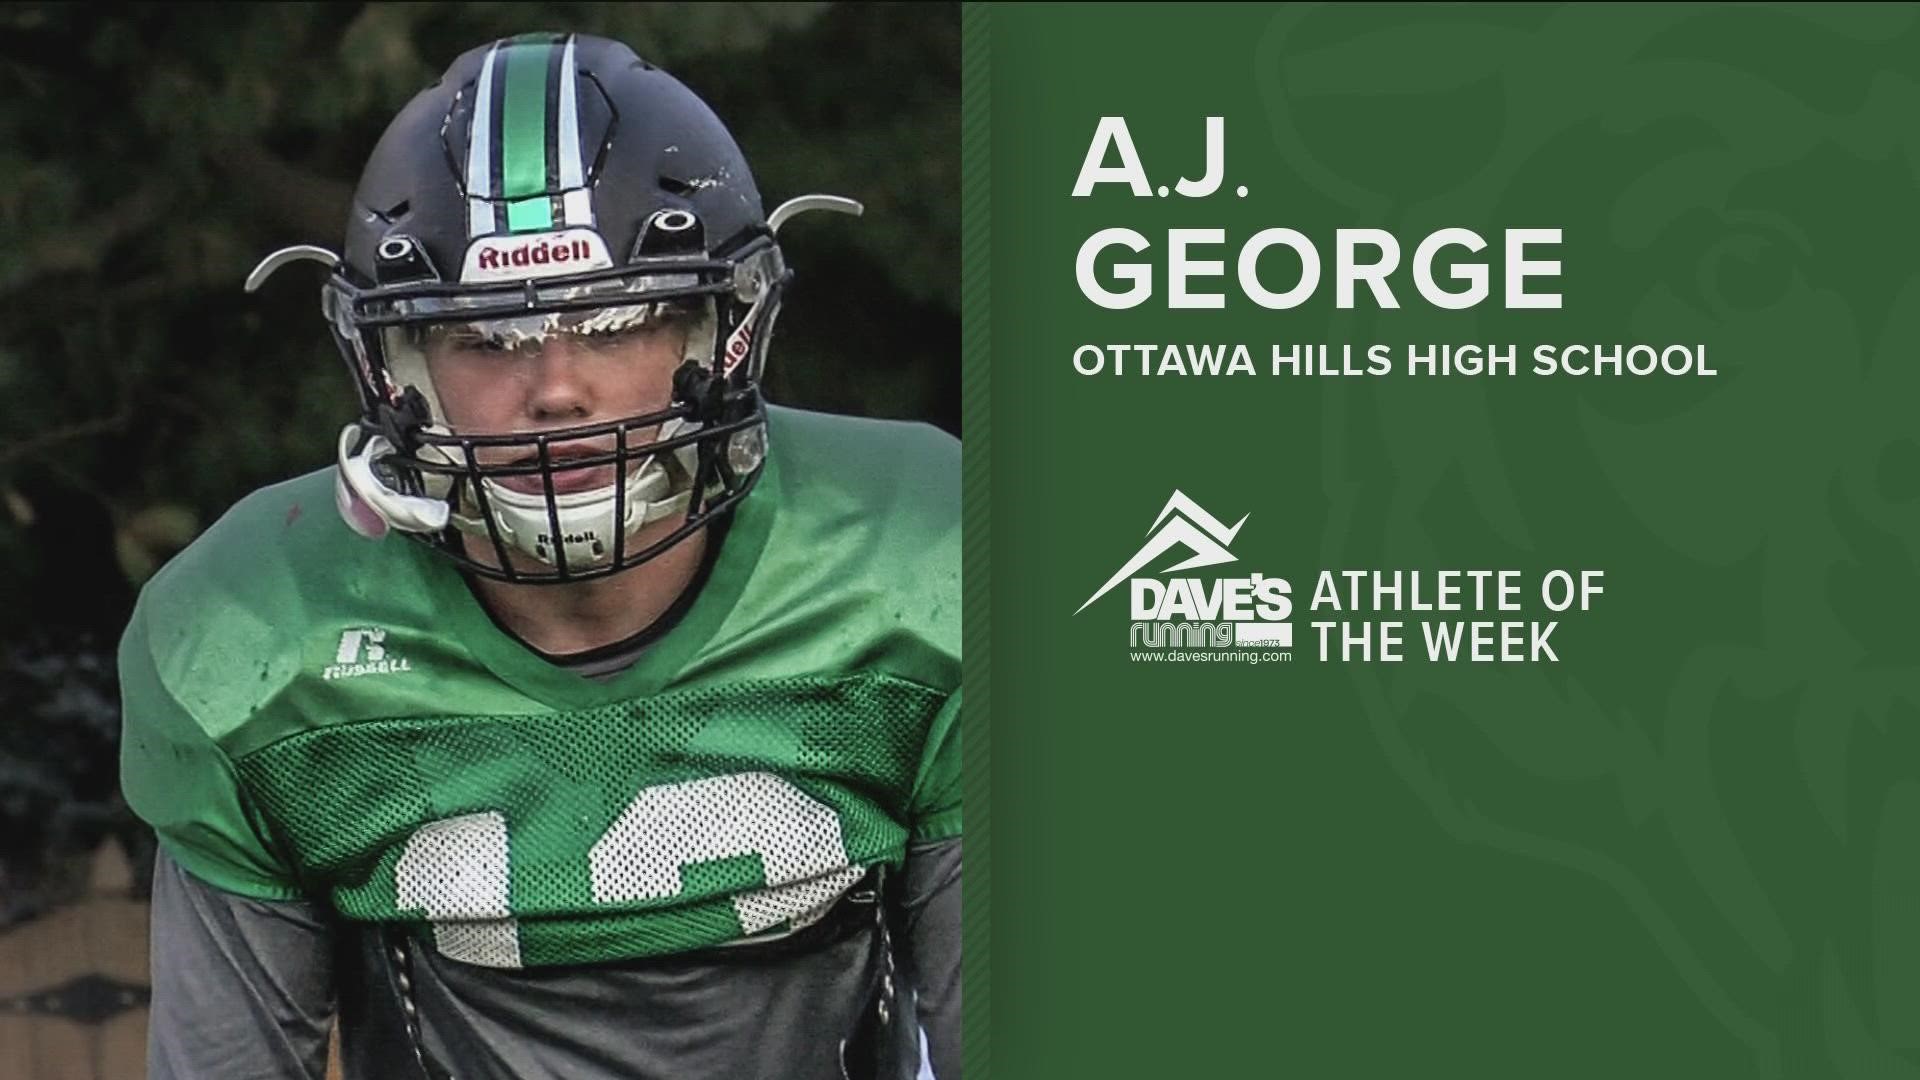 Despite a fractured leg halting part of his senior season, George has returned to the field with great attitude and drive.